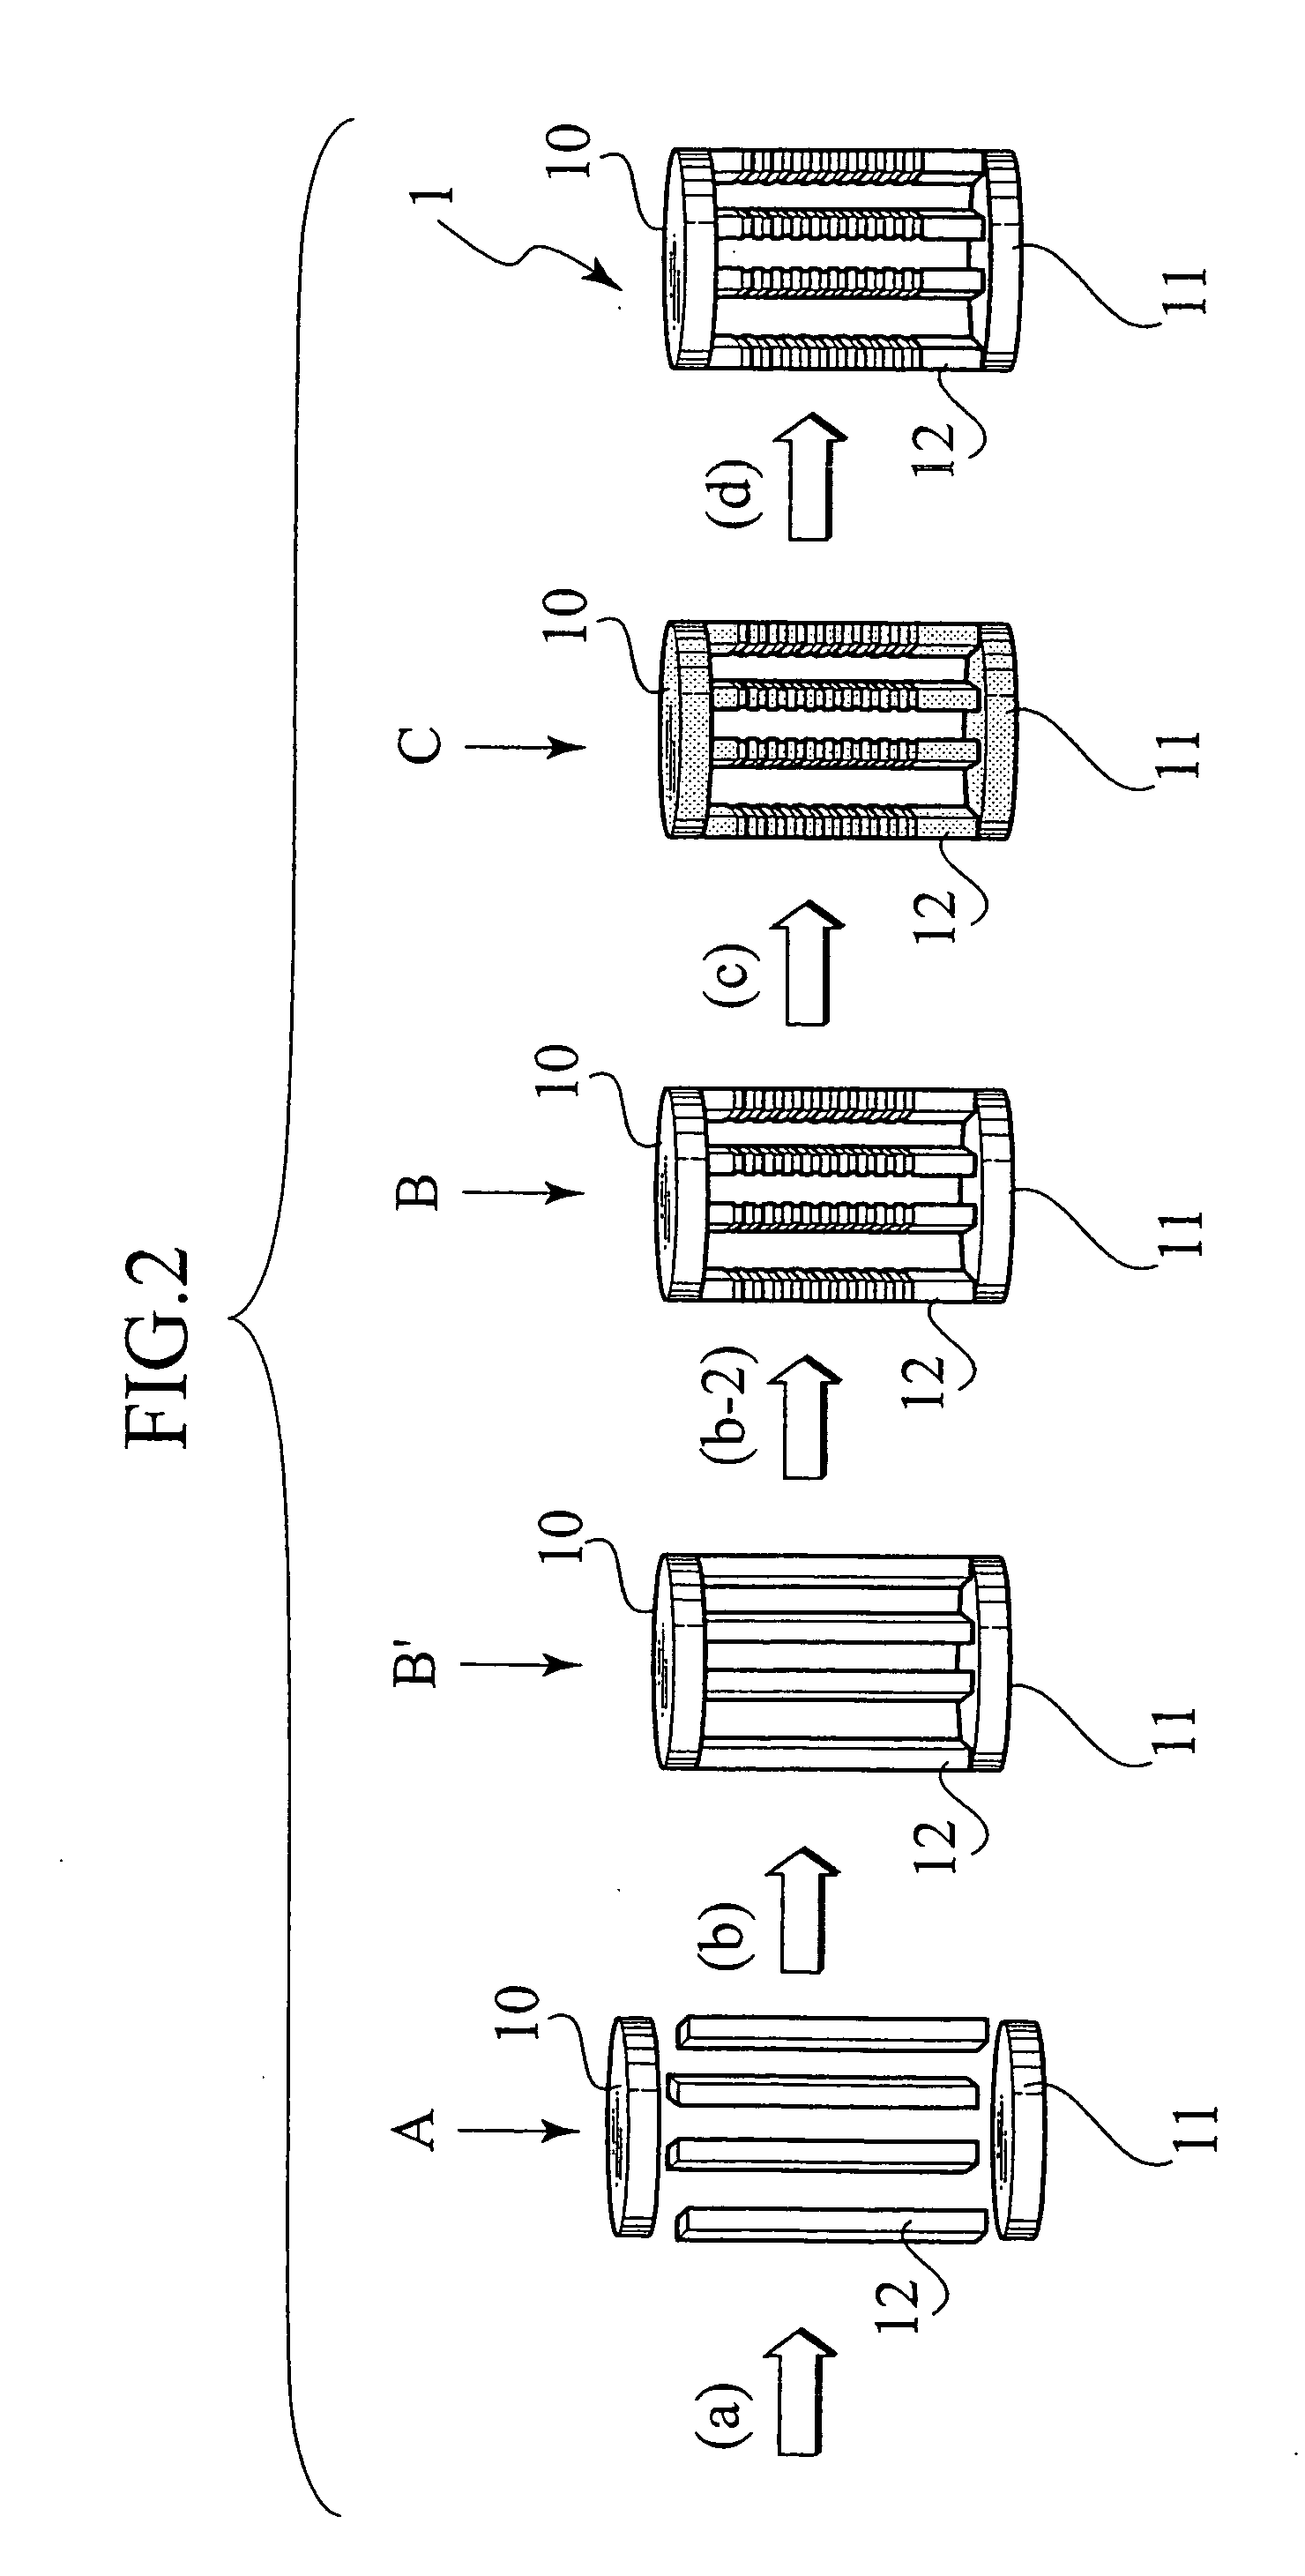 Method of producing silicon carbide sintered body jig, and silicon carbide sintered body jig obtained by the production method